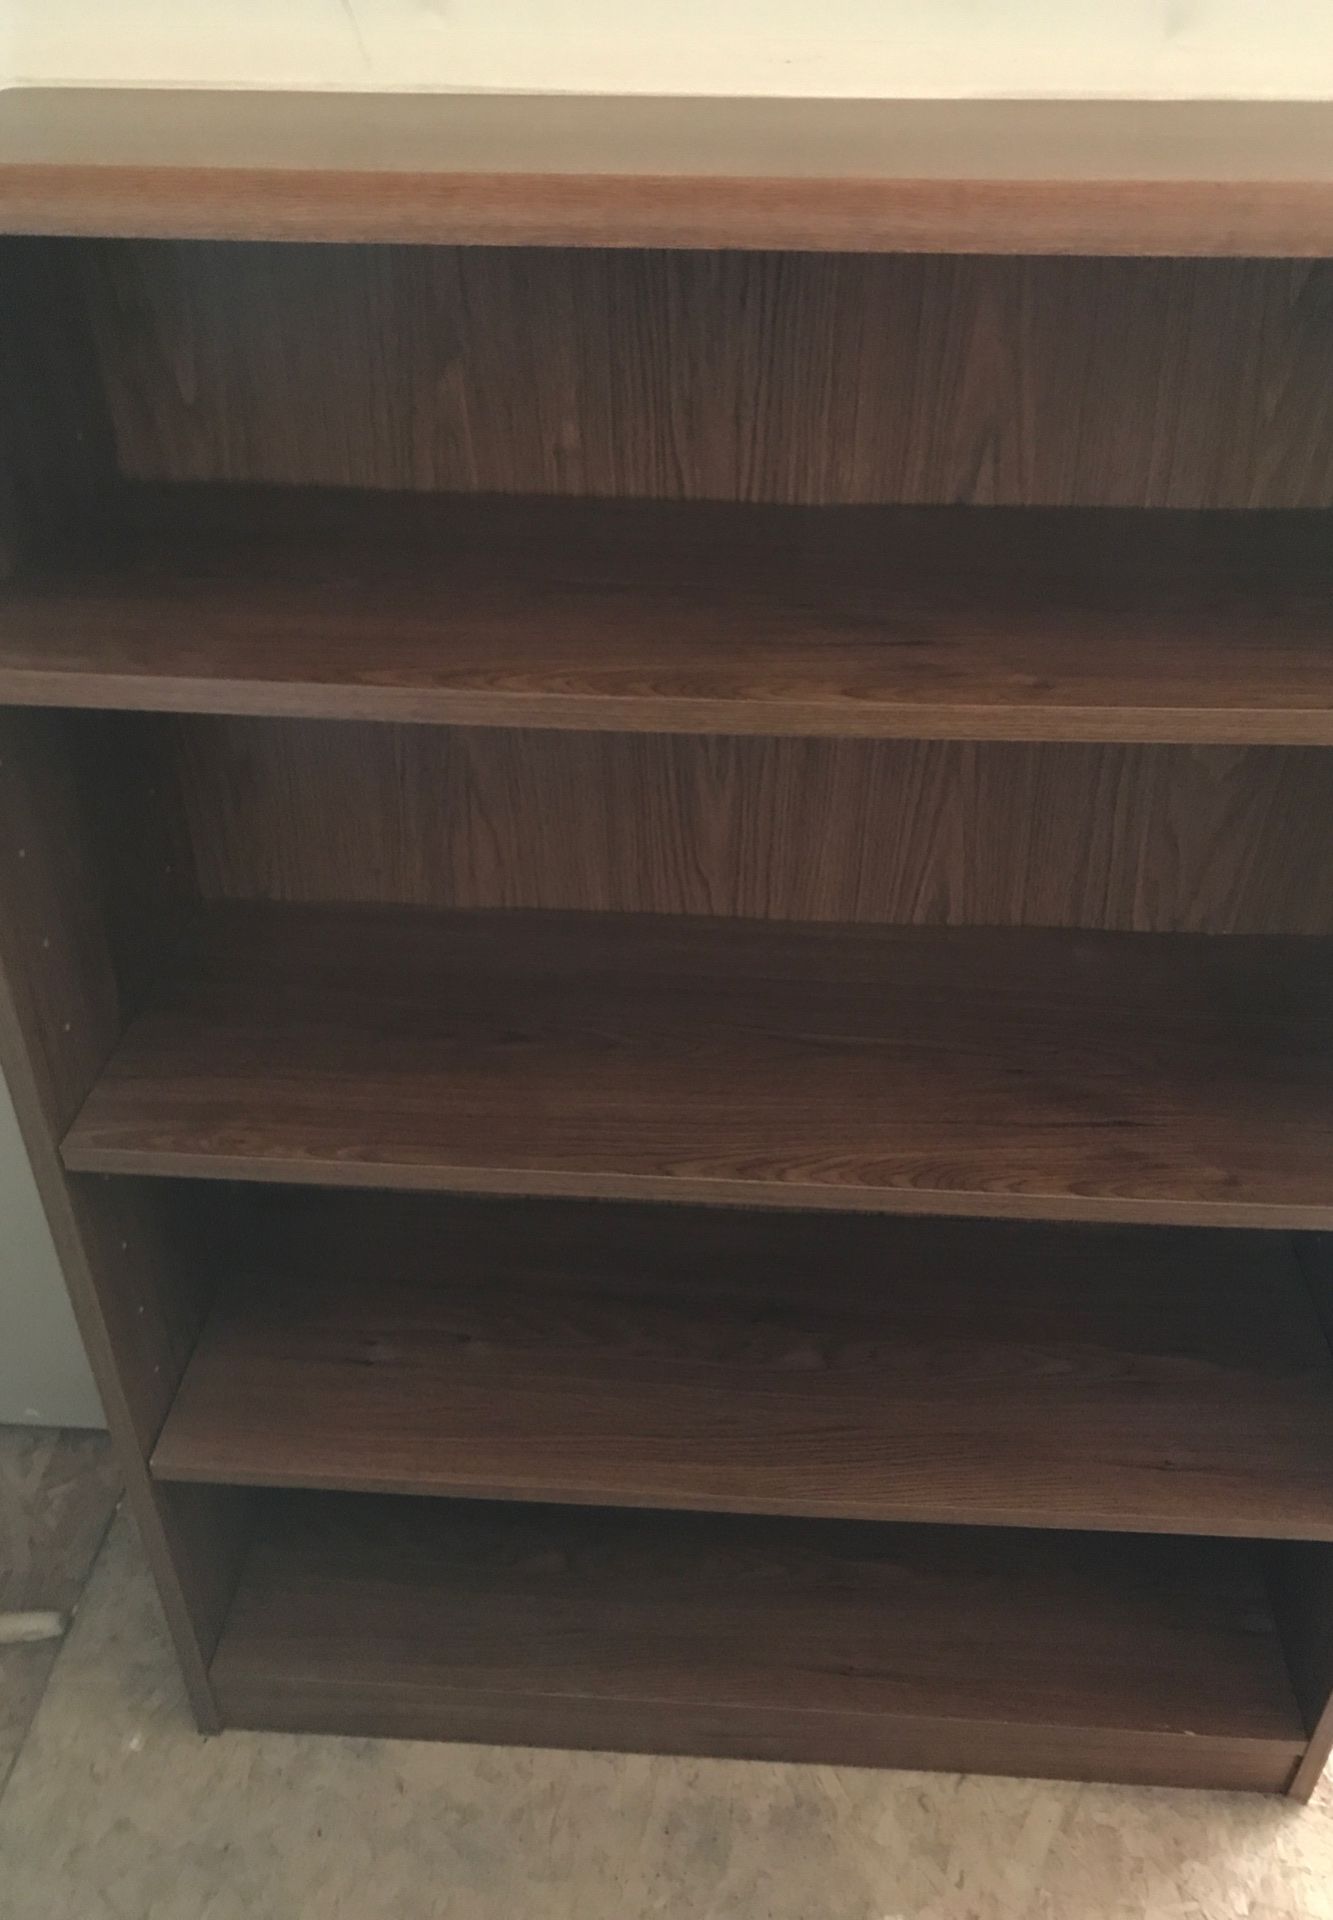 FREE Bookcase! Excellent condition. Moving soon won’t be needed in new place.